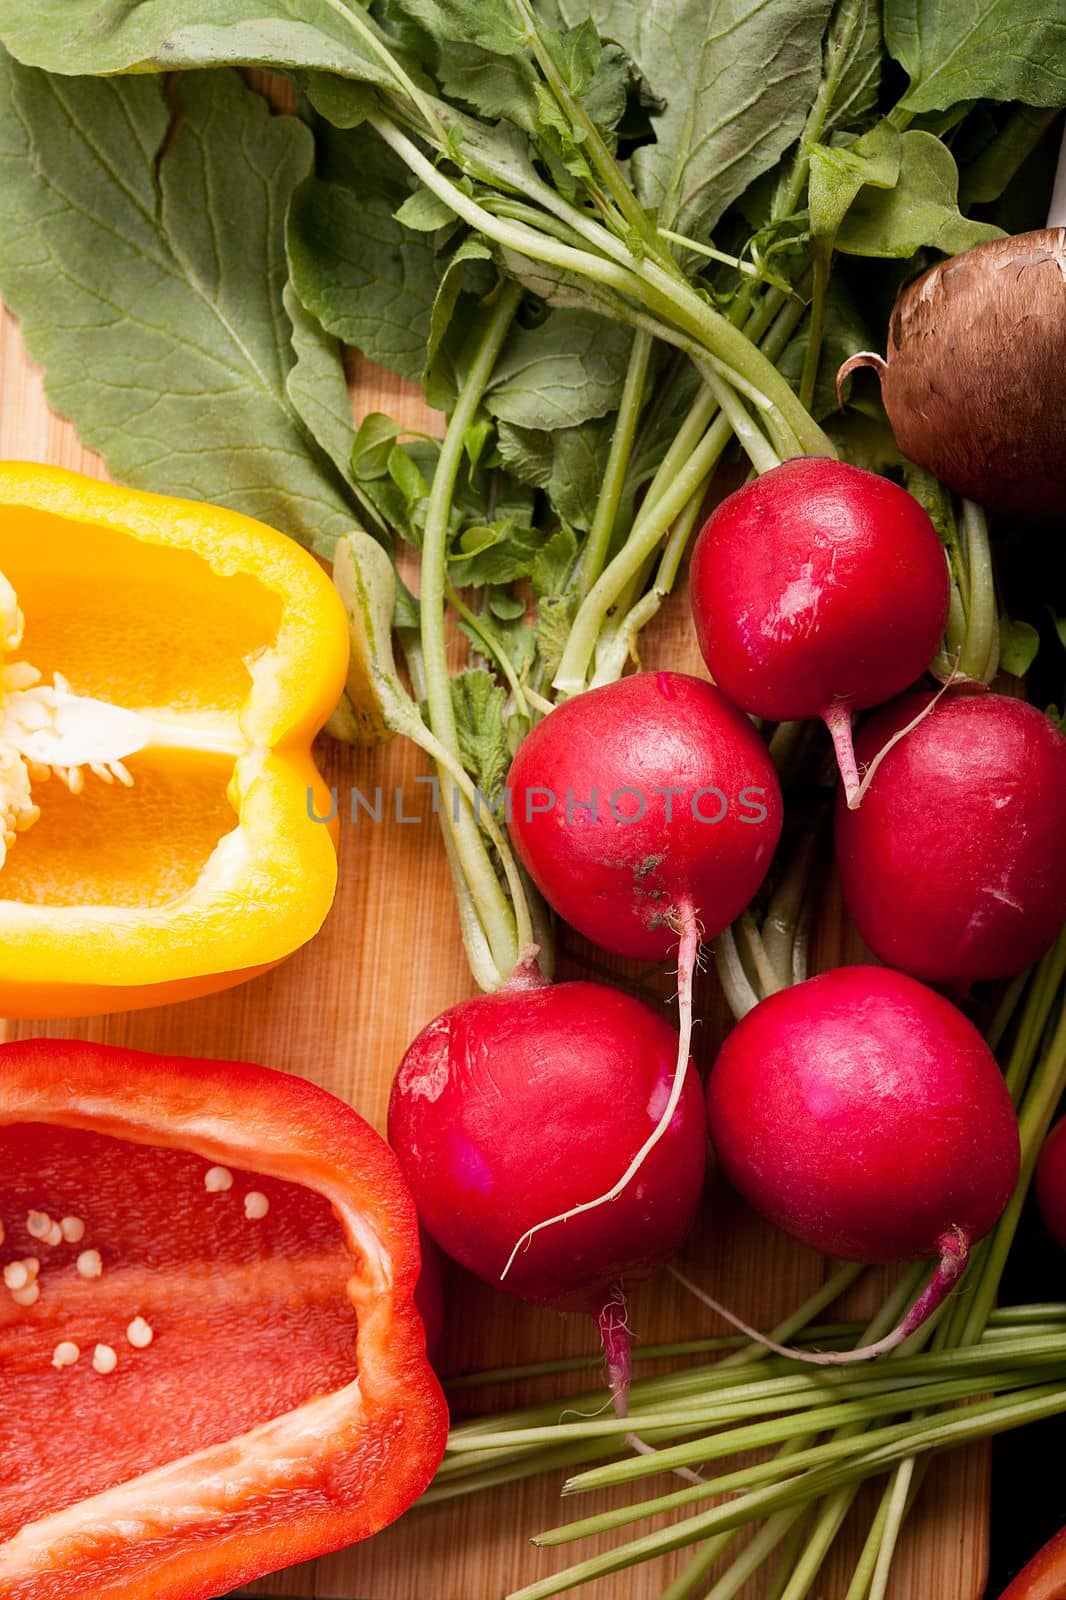 Healthy lifestyle concept image with different vegetables by DCStudio